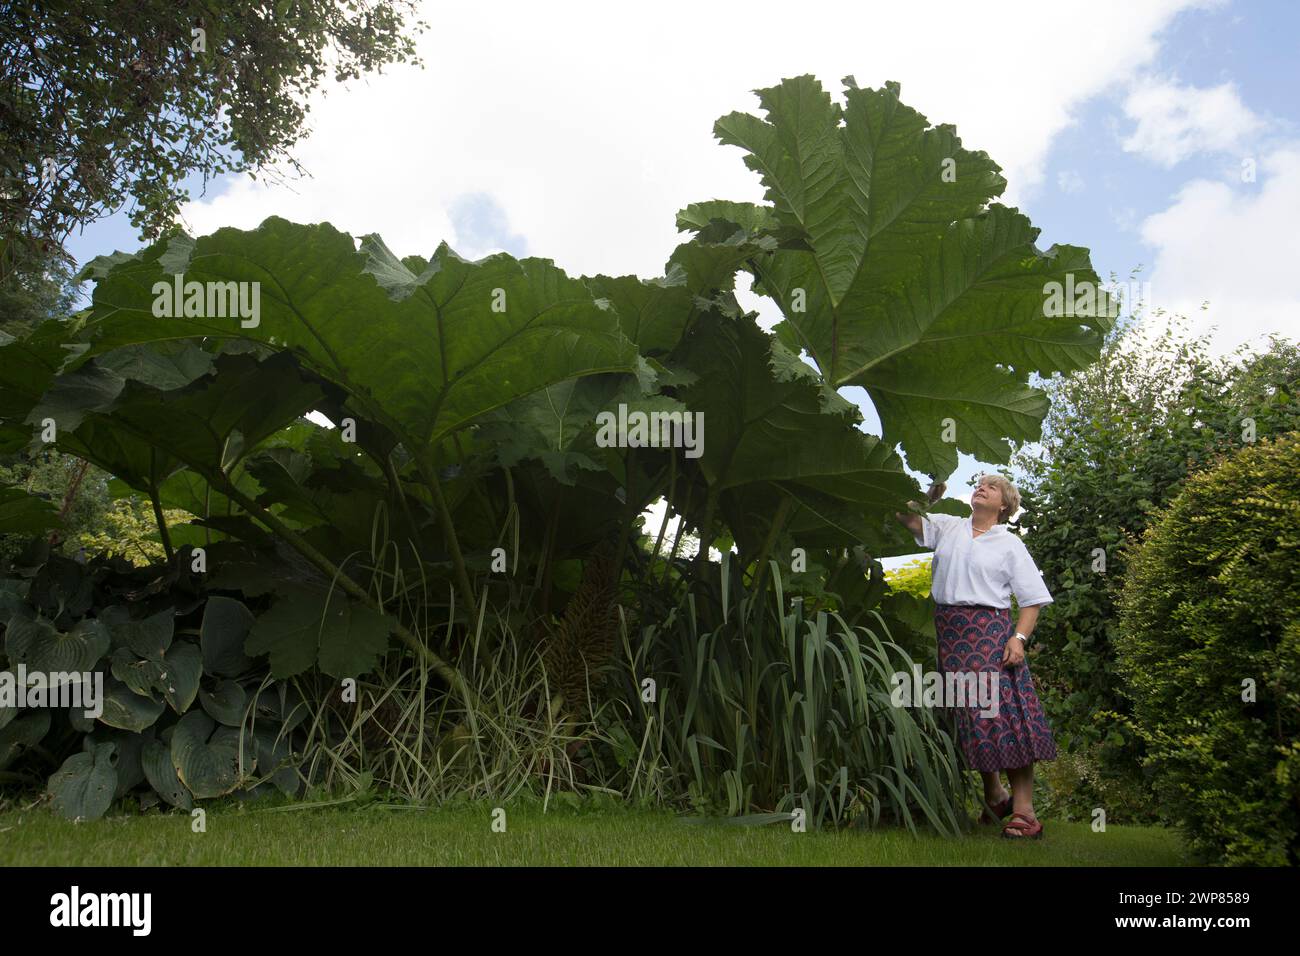 07/08/16  Jenny Phillips, prunes the giant gunnera  plant.   "This is probably the best year ever for our giant gunnera plant," said gardener Jenny Ph Stock Photo